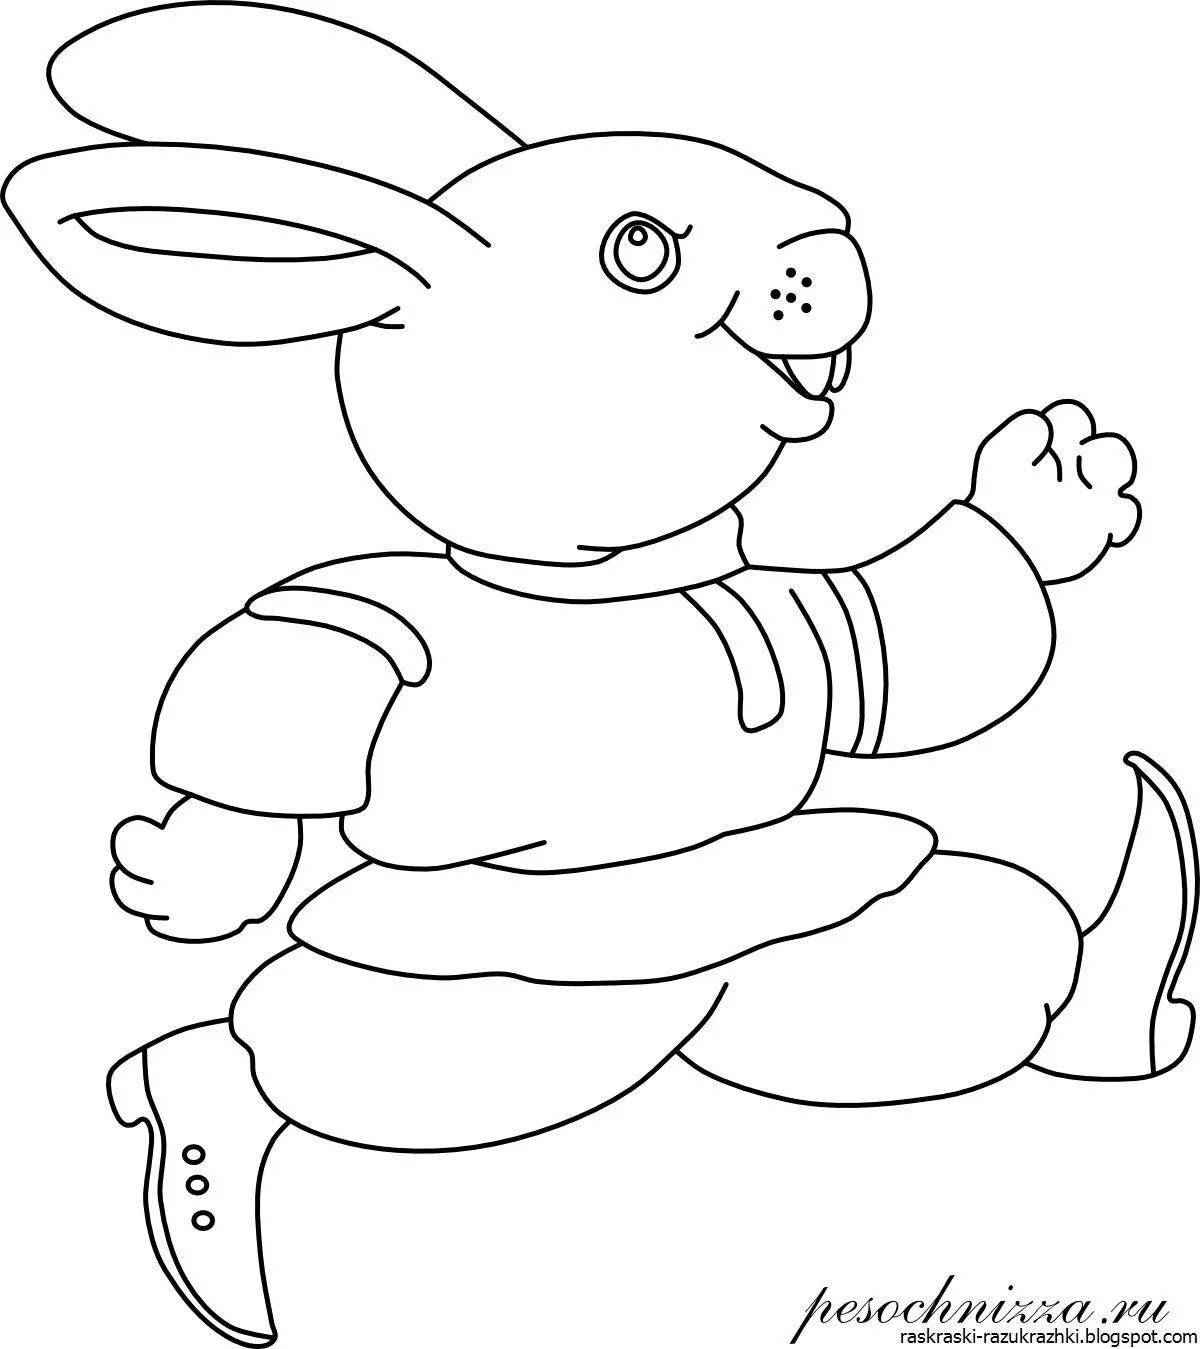 Radiant coloring page fairy tales